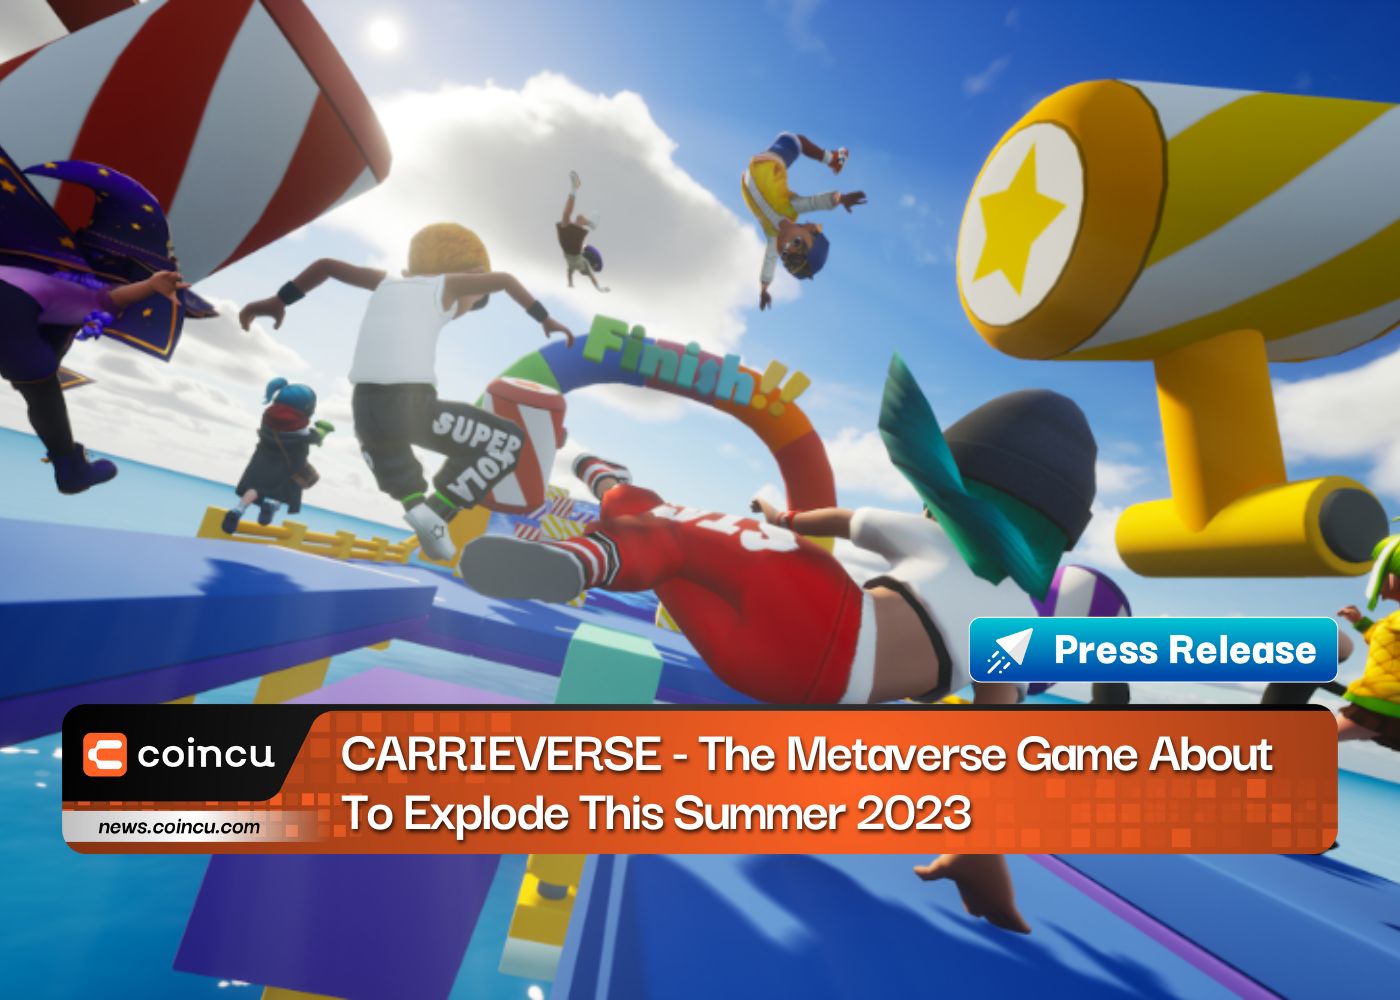 CARRIEVERSE - The Metaverse Game About To Explode This Summer 2023